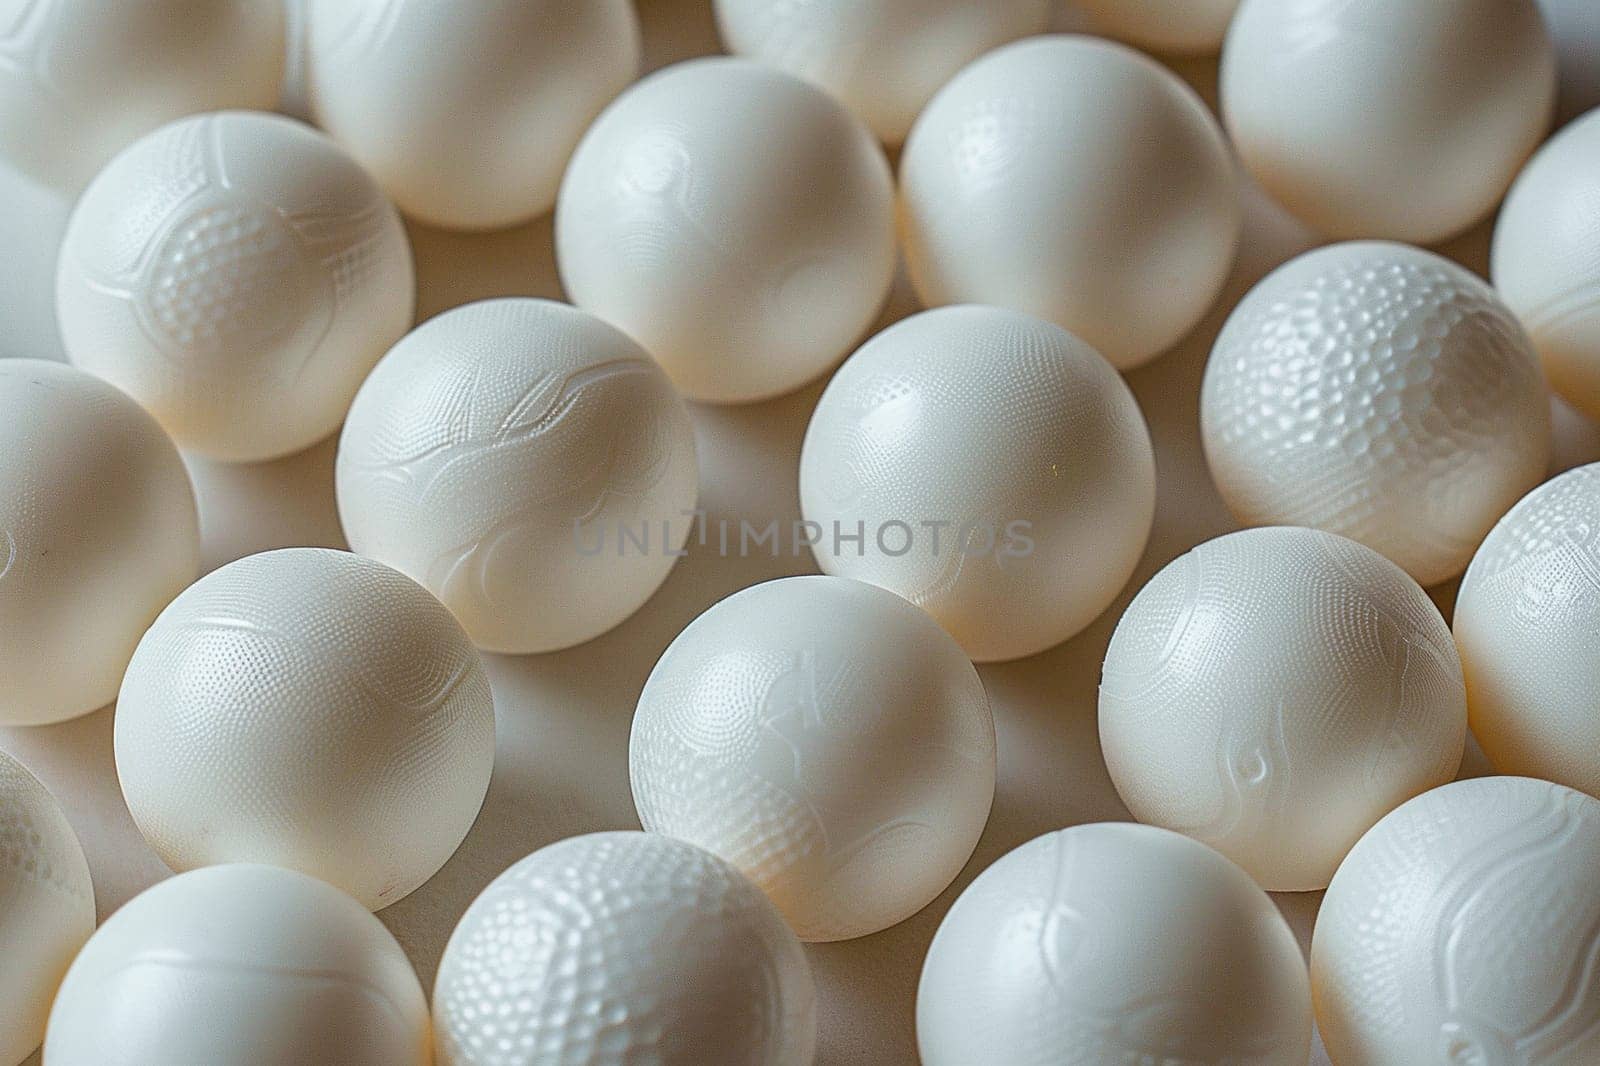 Horizontal background with many white ping pong and tennis balls.